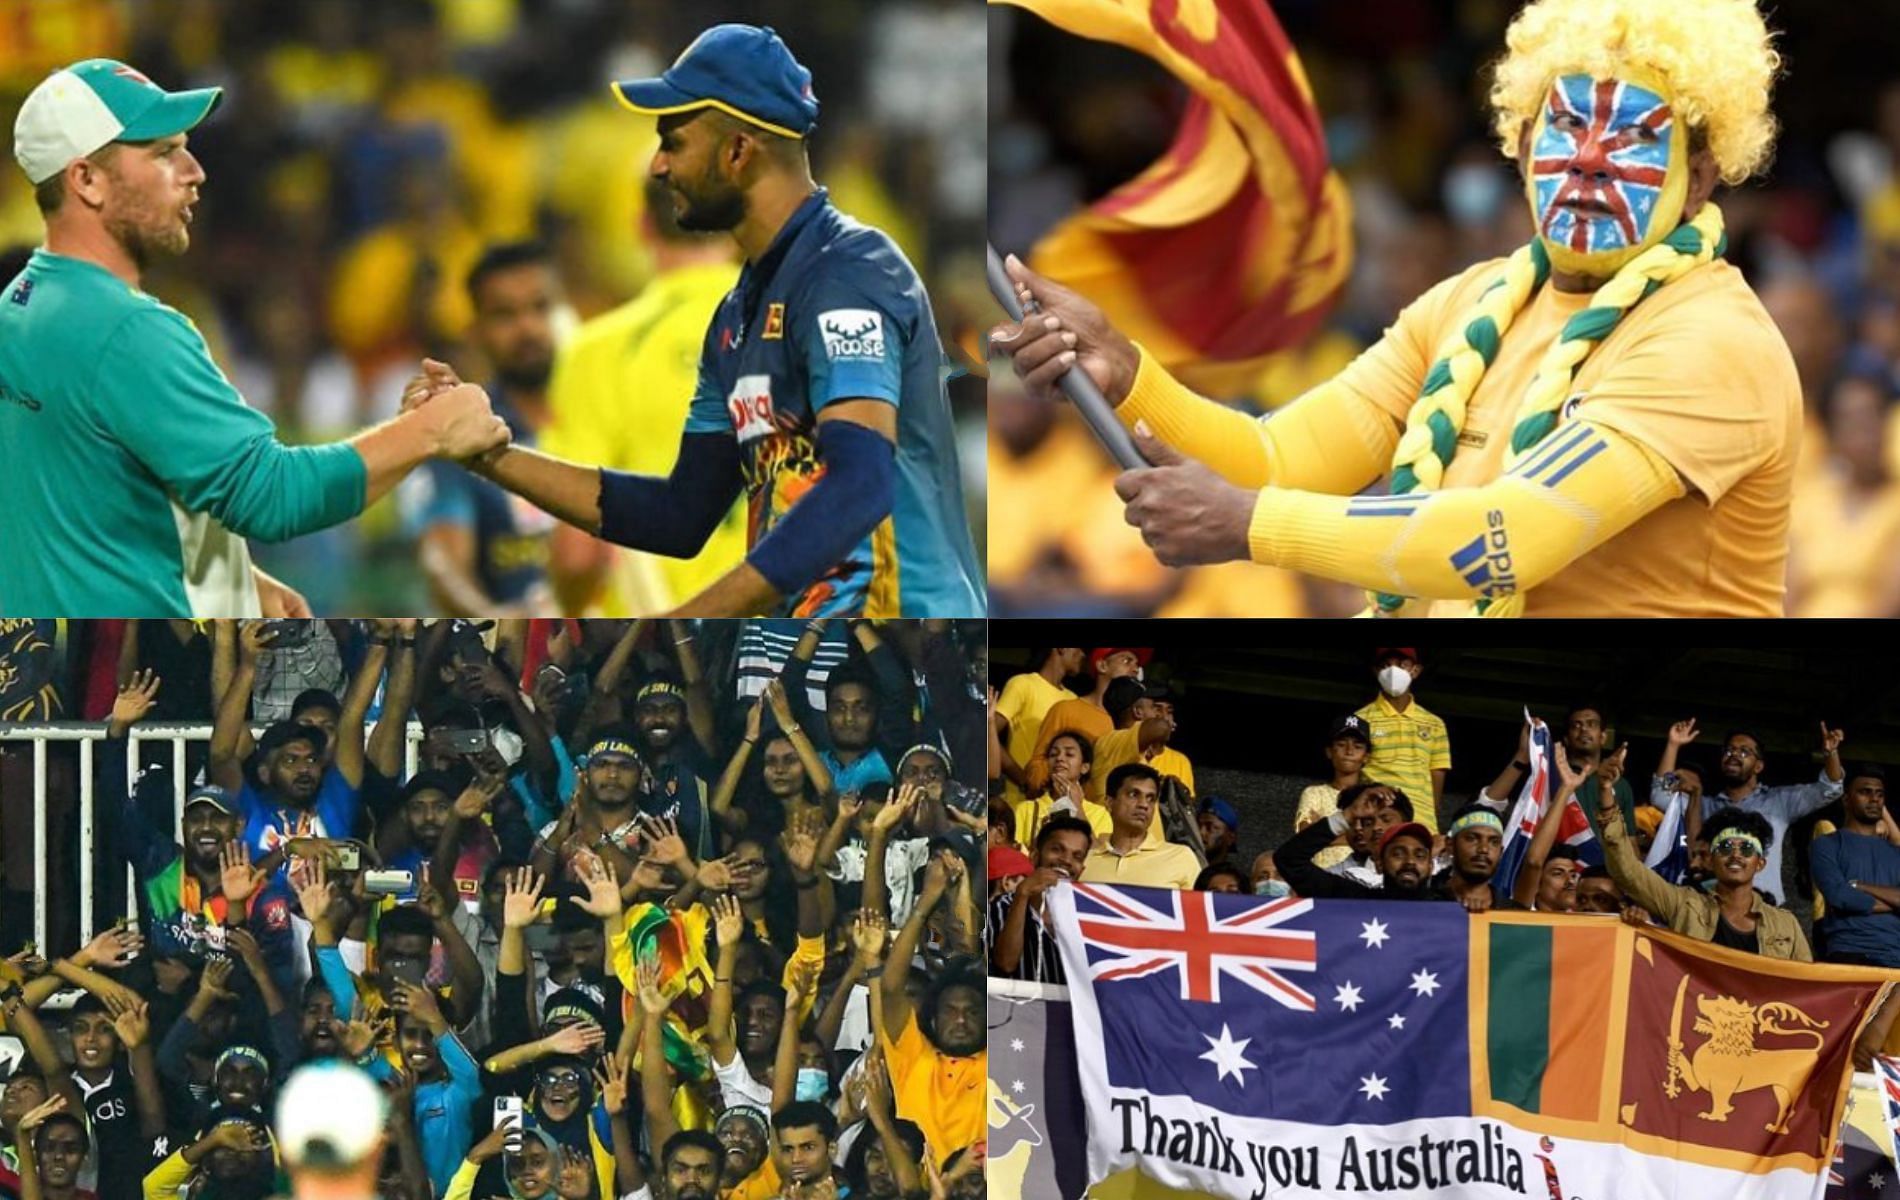 Australia&rsquo;s tour has given Sri Lanka something to cheer about amid the economic crisis in the country.